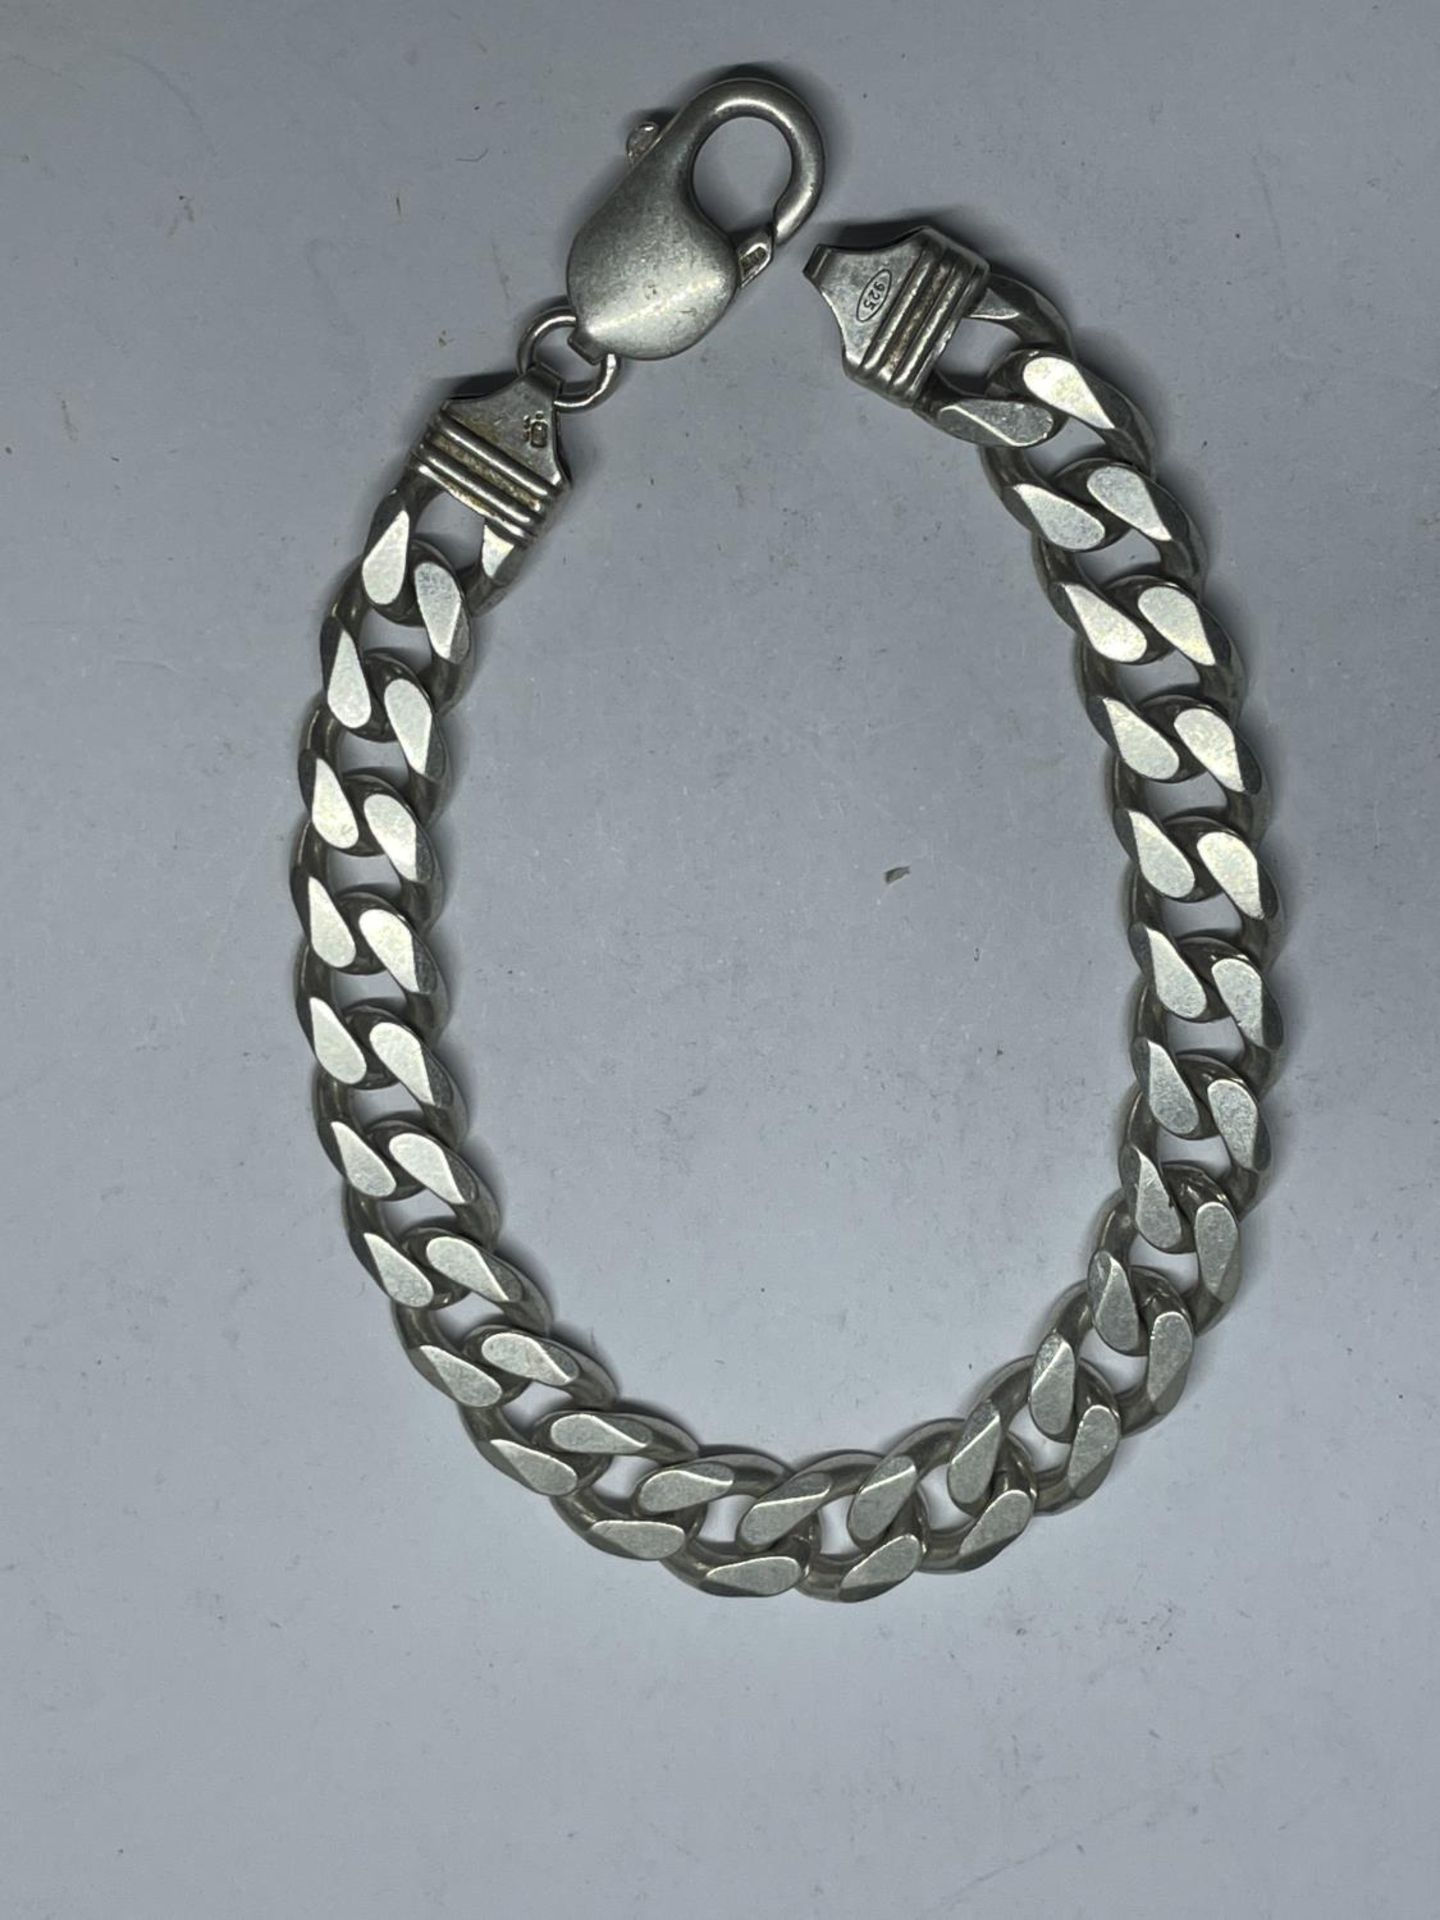 A HEAVY MARKED SILVER FLAT LINK BRACELET LENGTH 20.5 CM WEIGHT 29.7 GRAMS